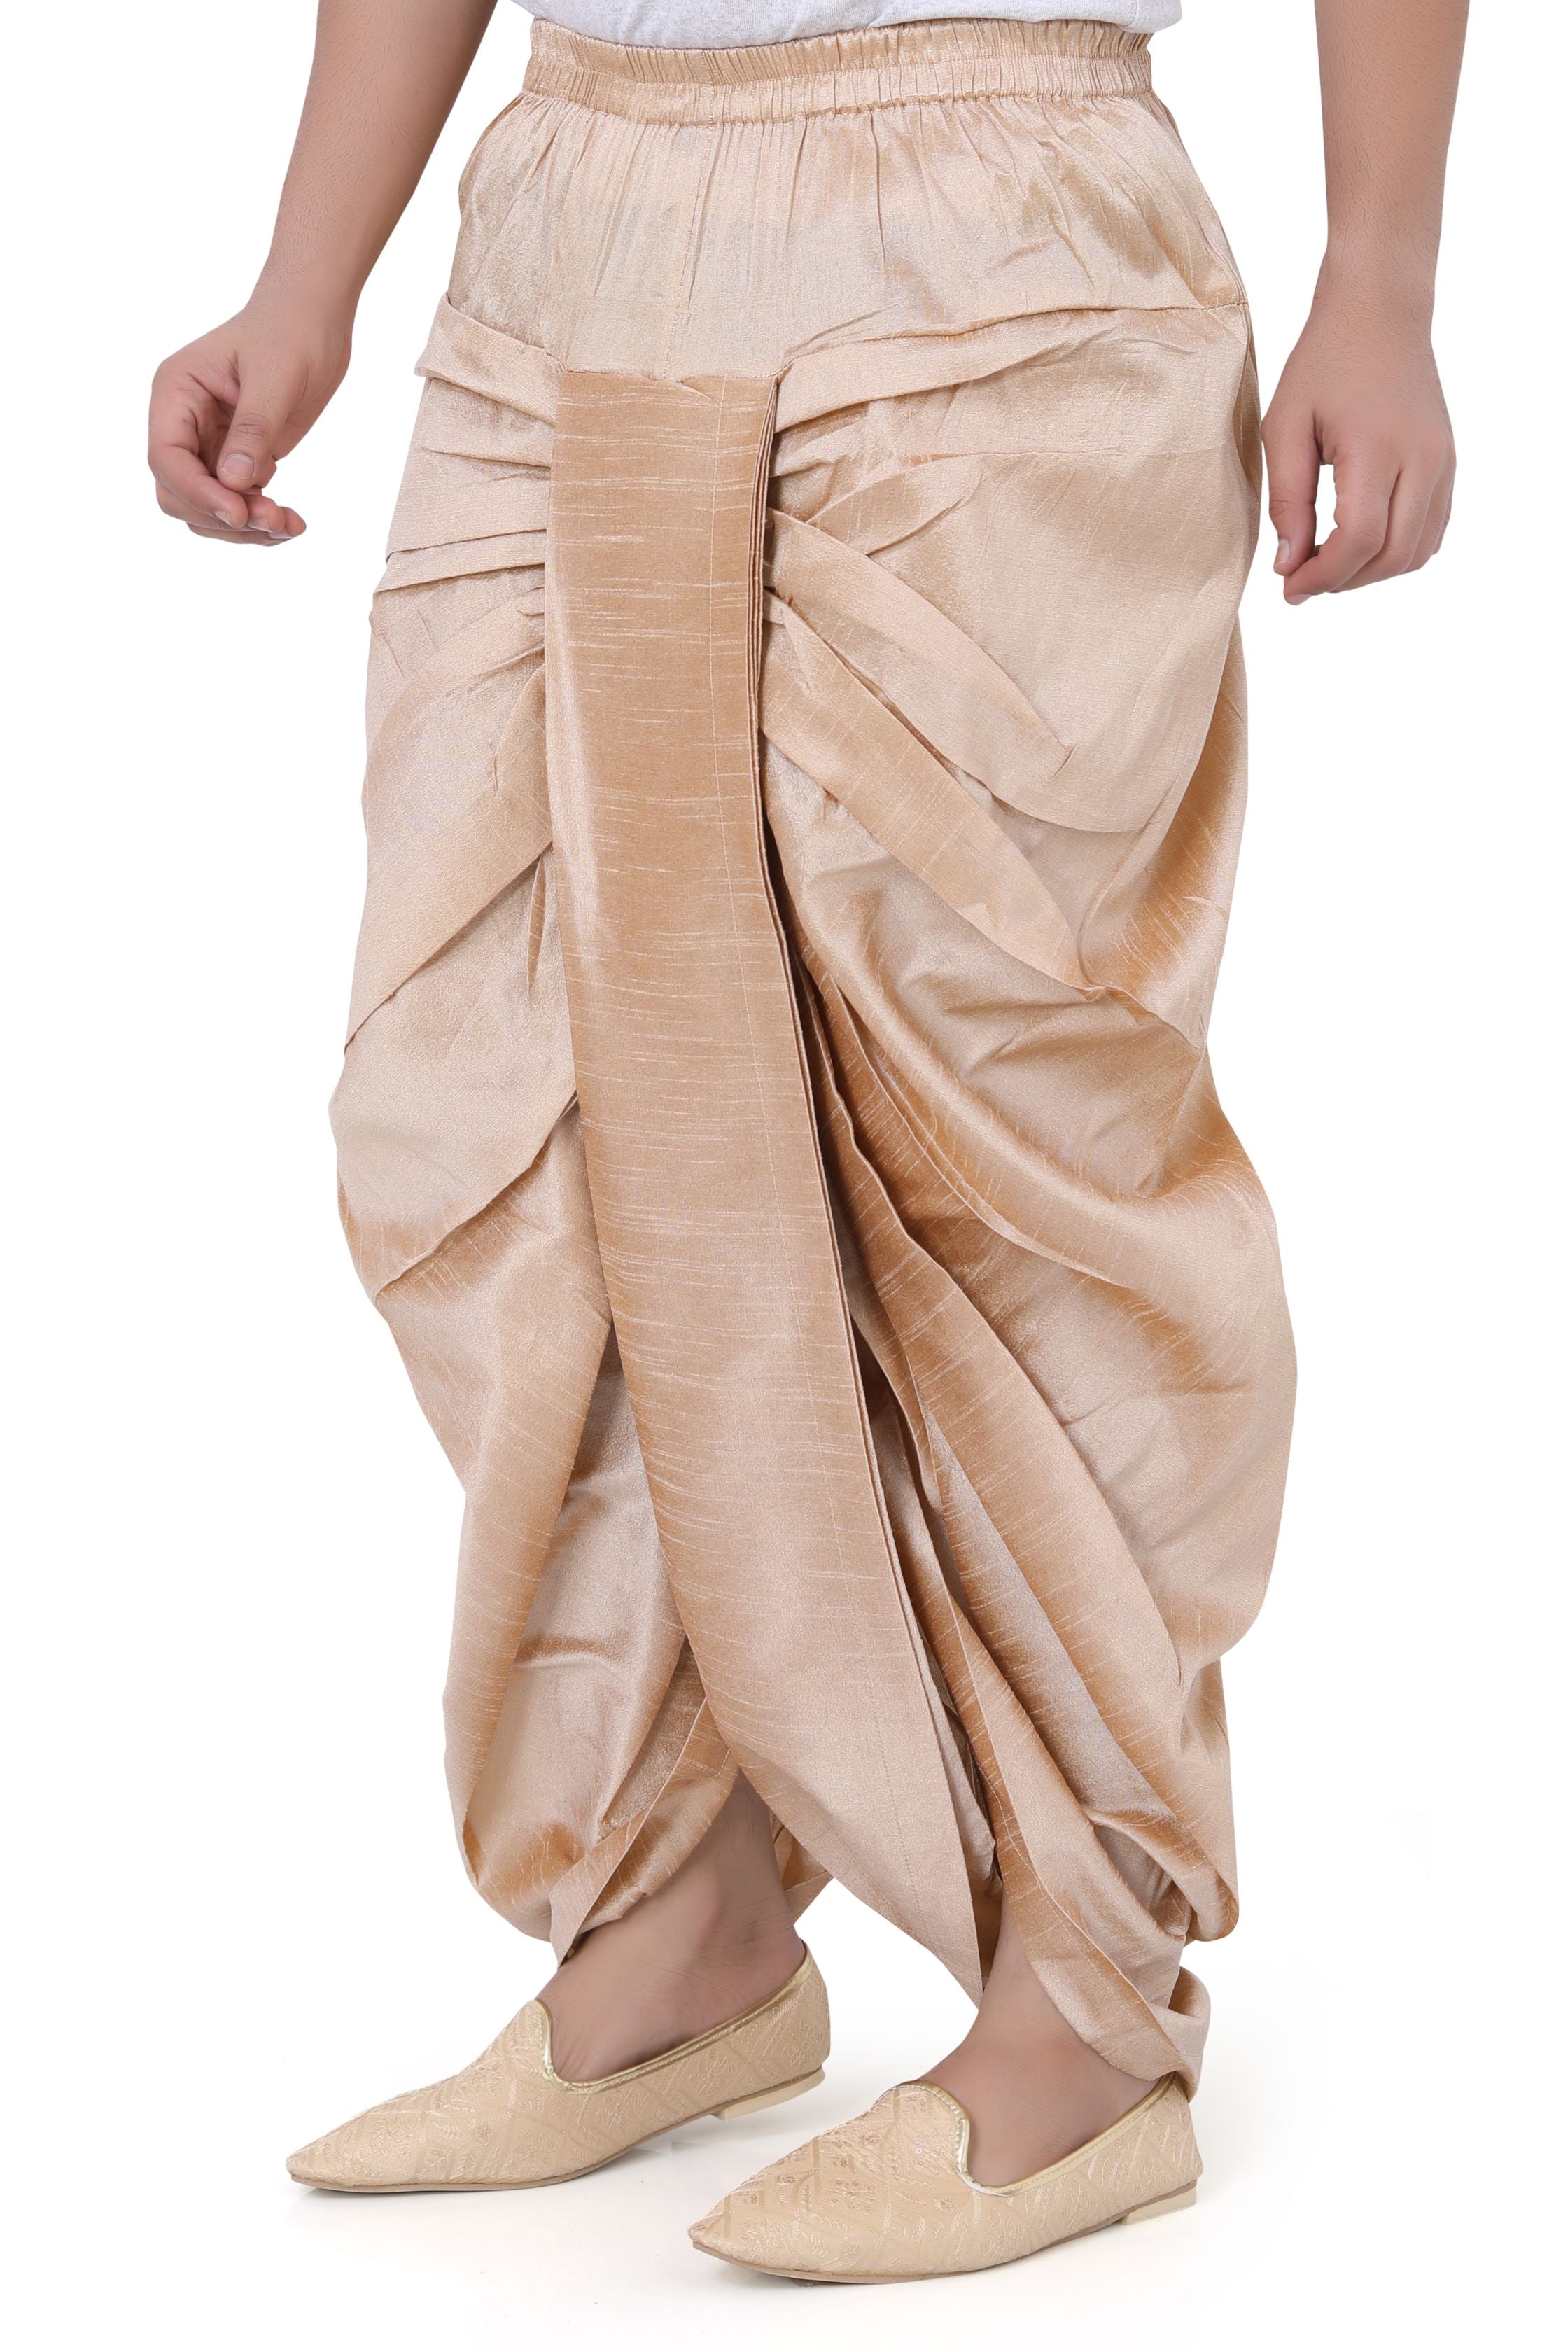 Dupion Silk Dhoti in Rose Gold  Colour